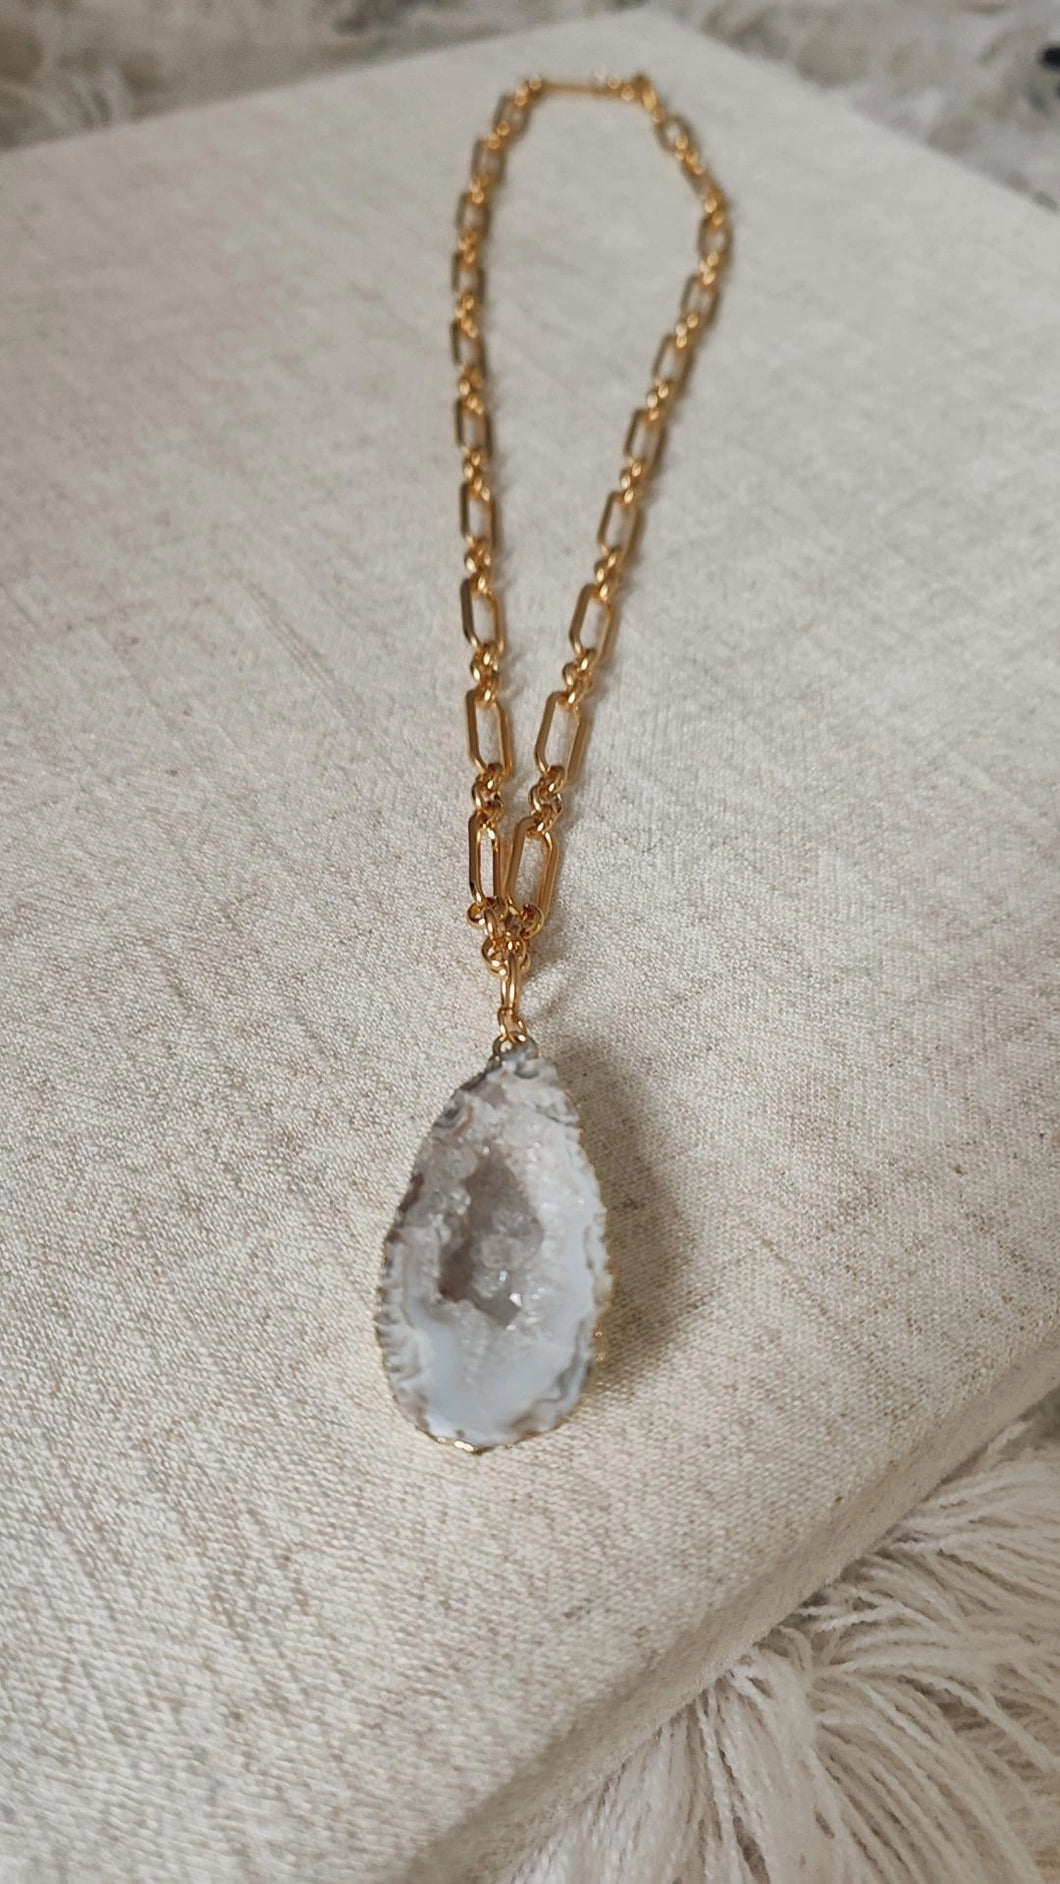 Agate geode necklace